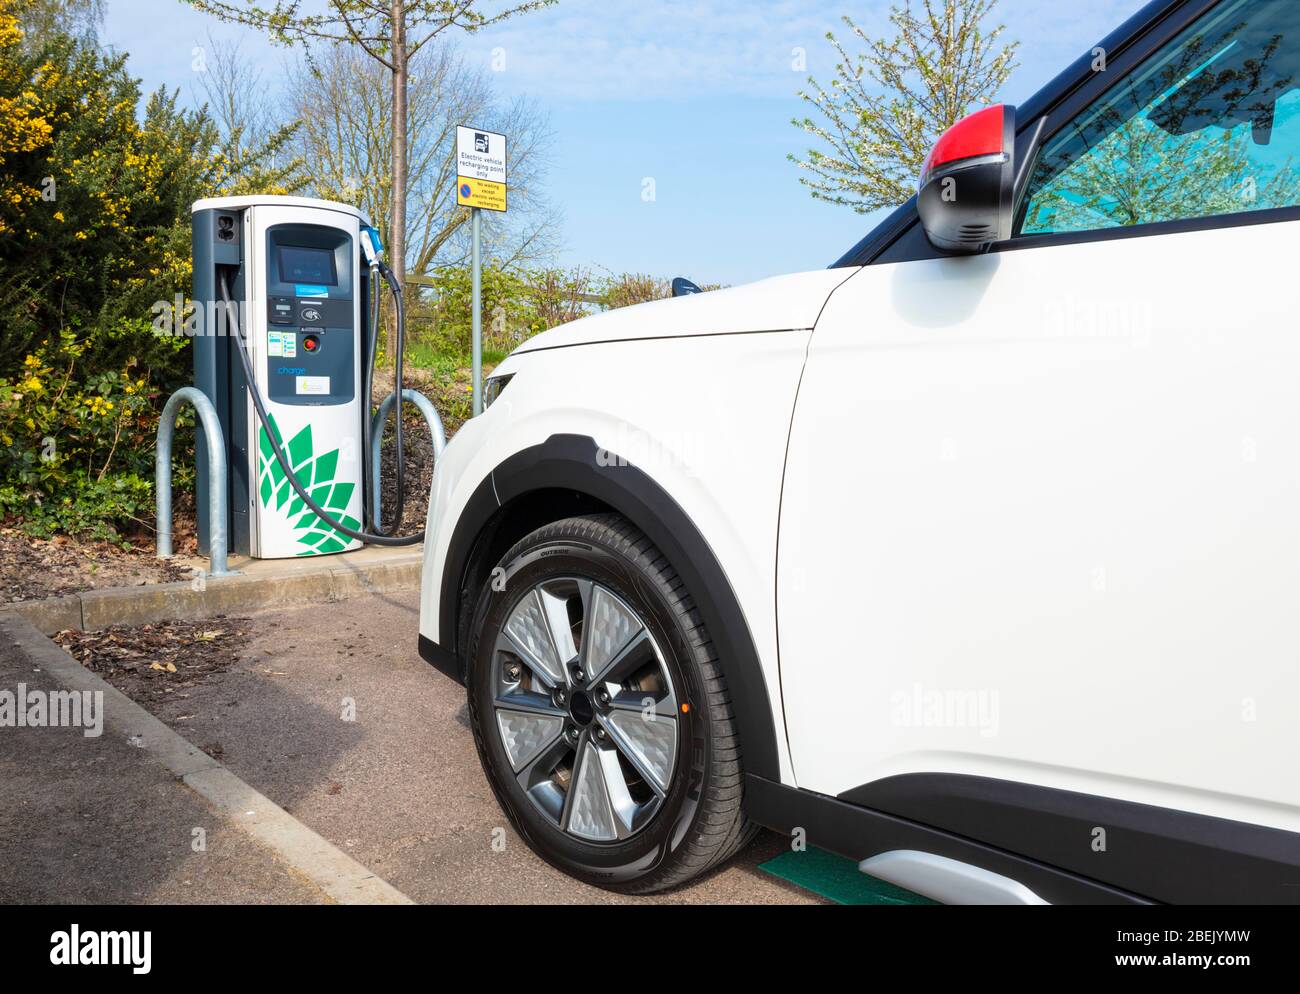 New electric car Kia E Soul march 2020 electric car charging at a public electric car charger parked in electric car charging parking space UK Stock Photo